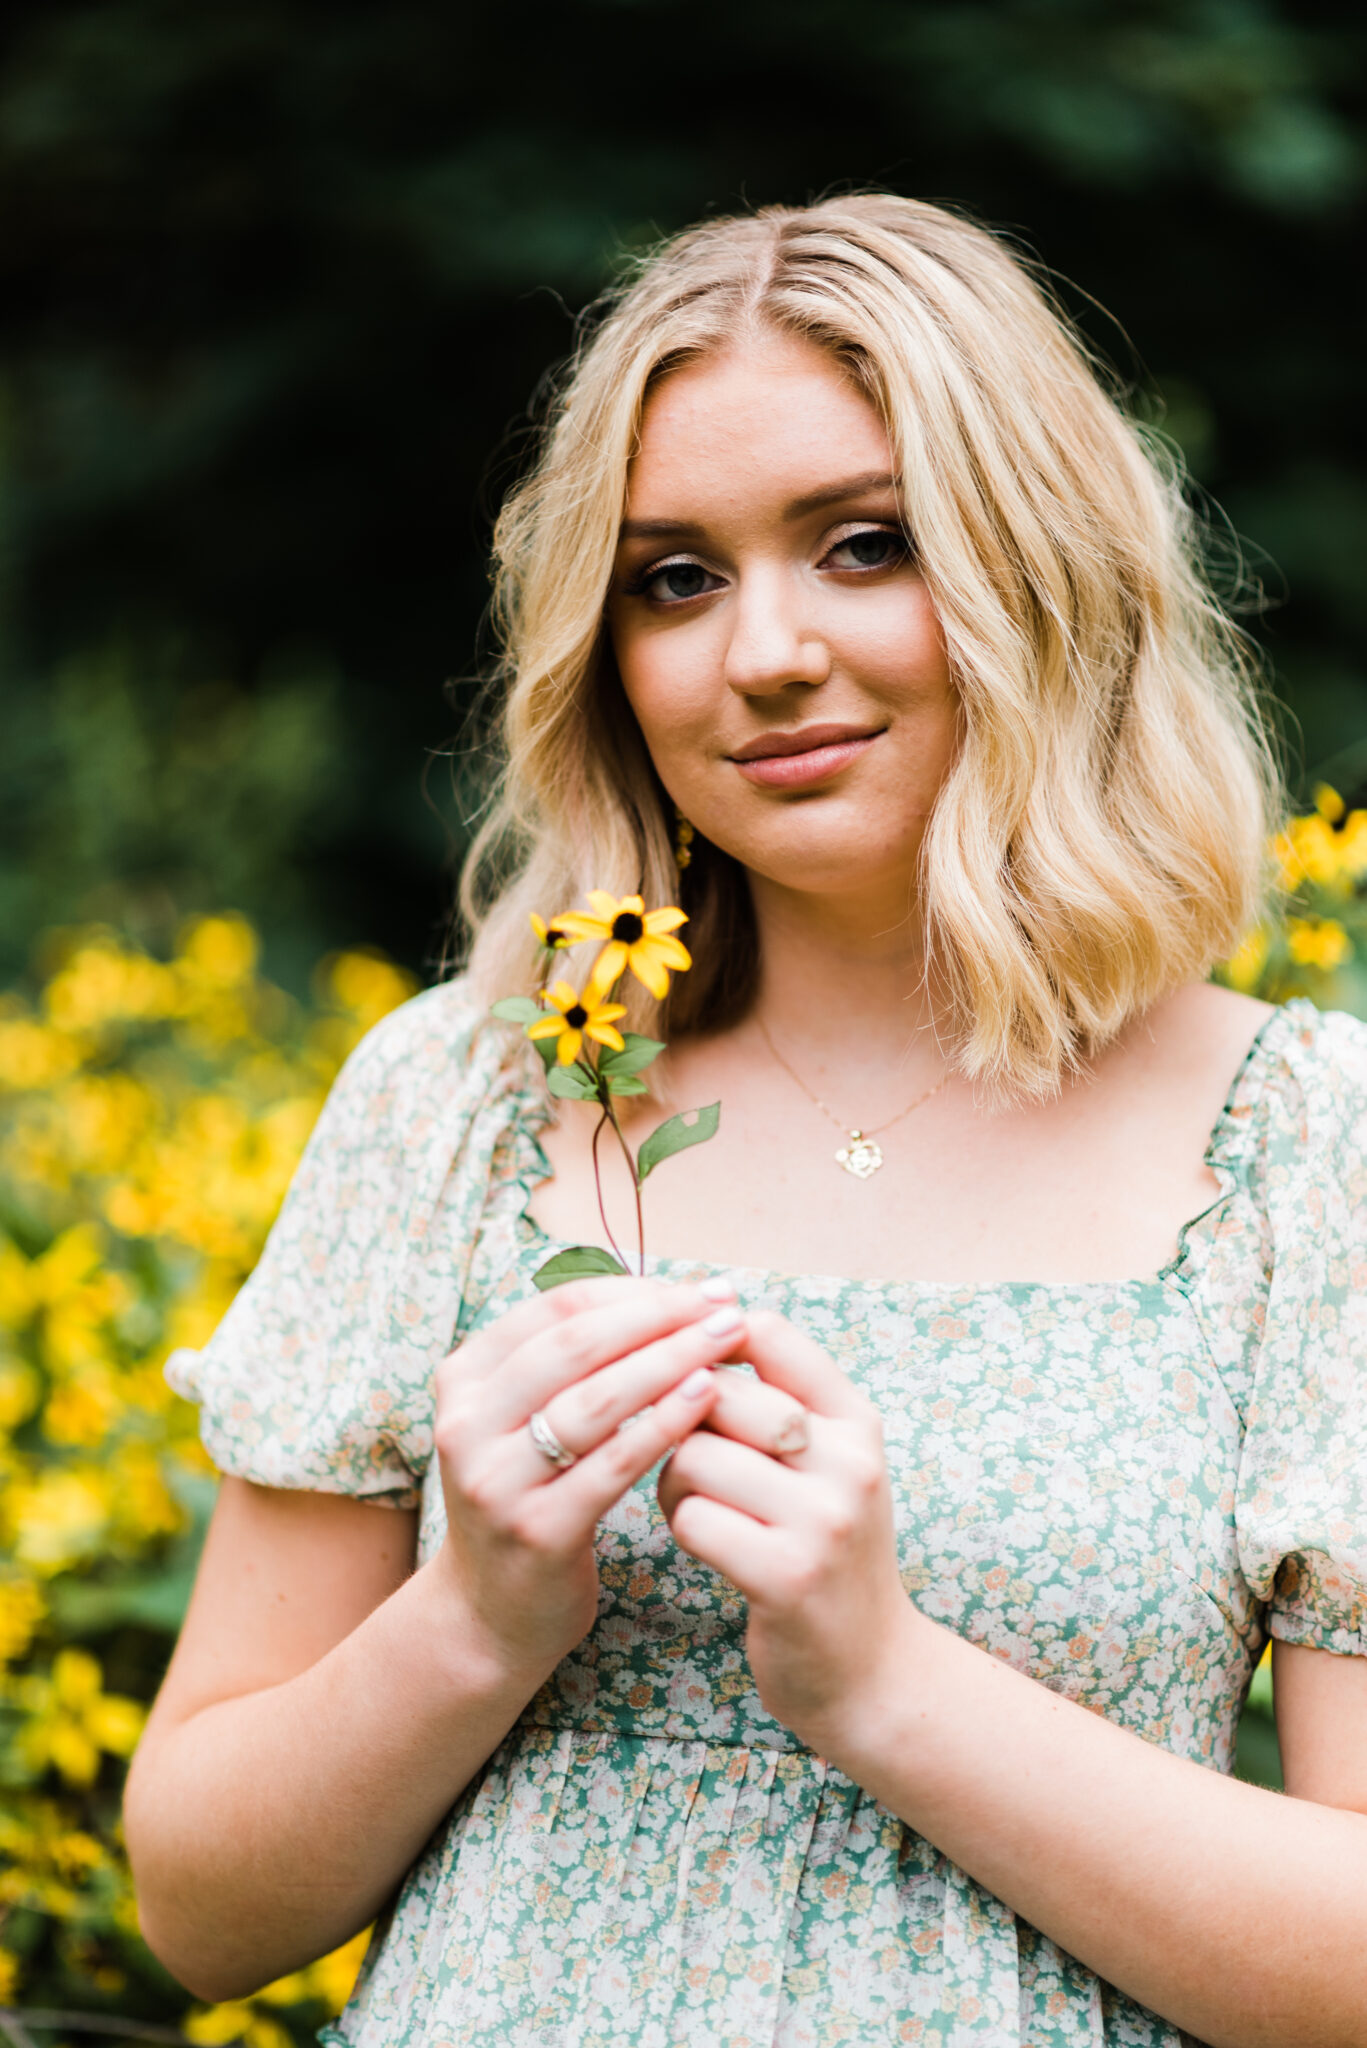 A girl with short blond hair and a green dress holds a few yellow flowers in her hands